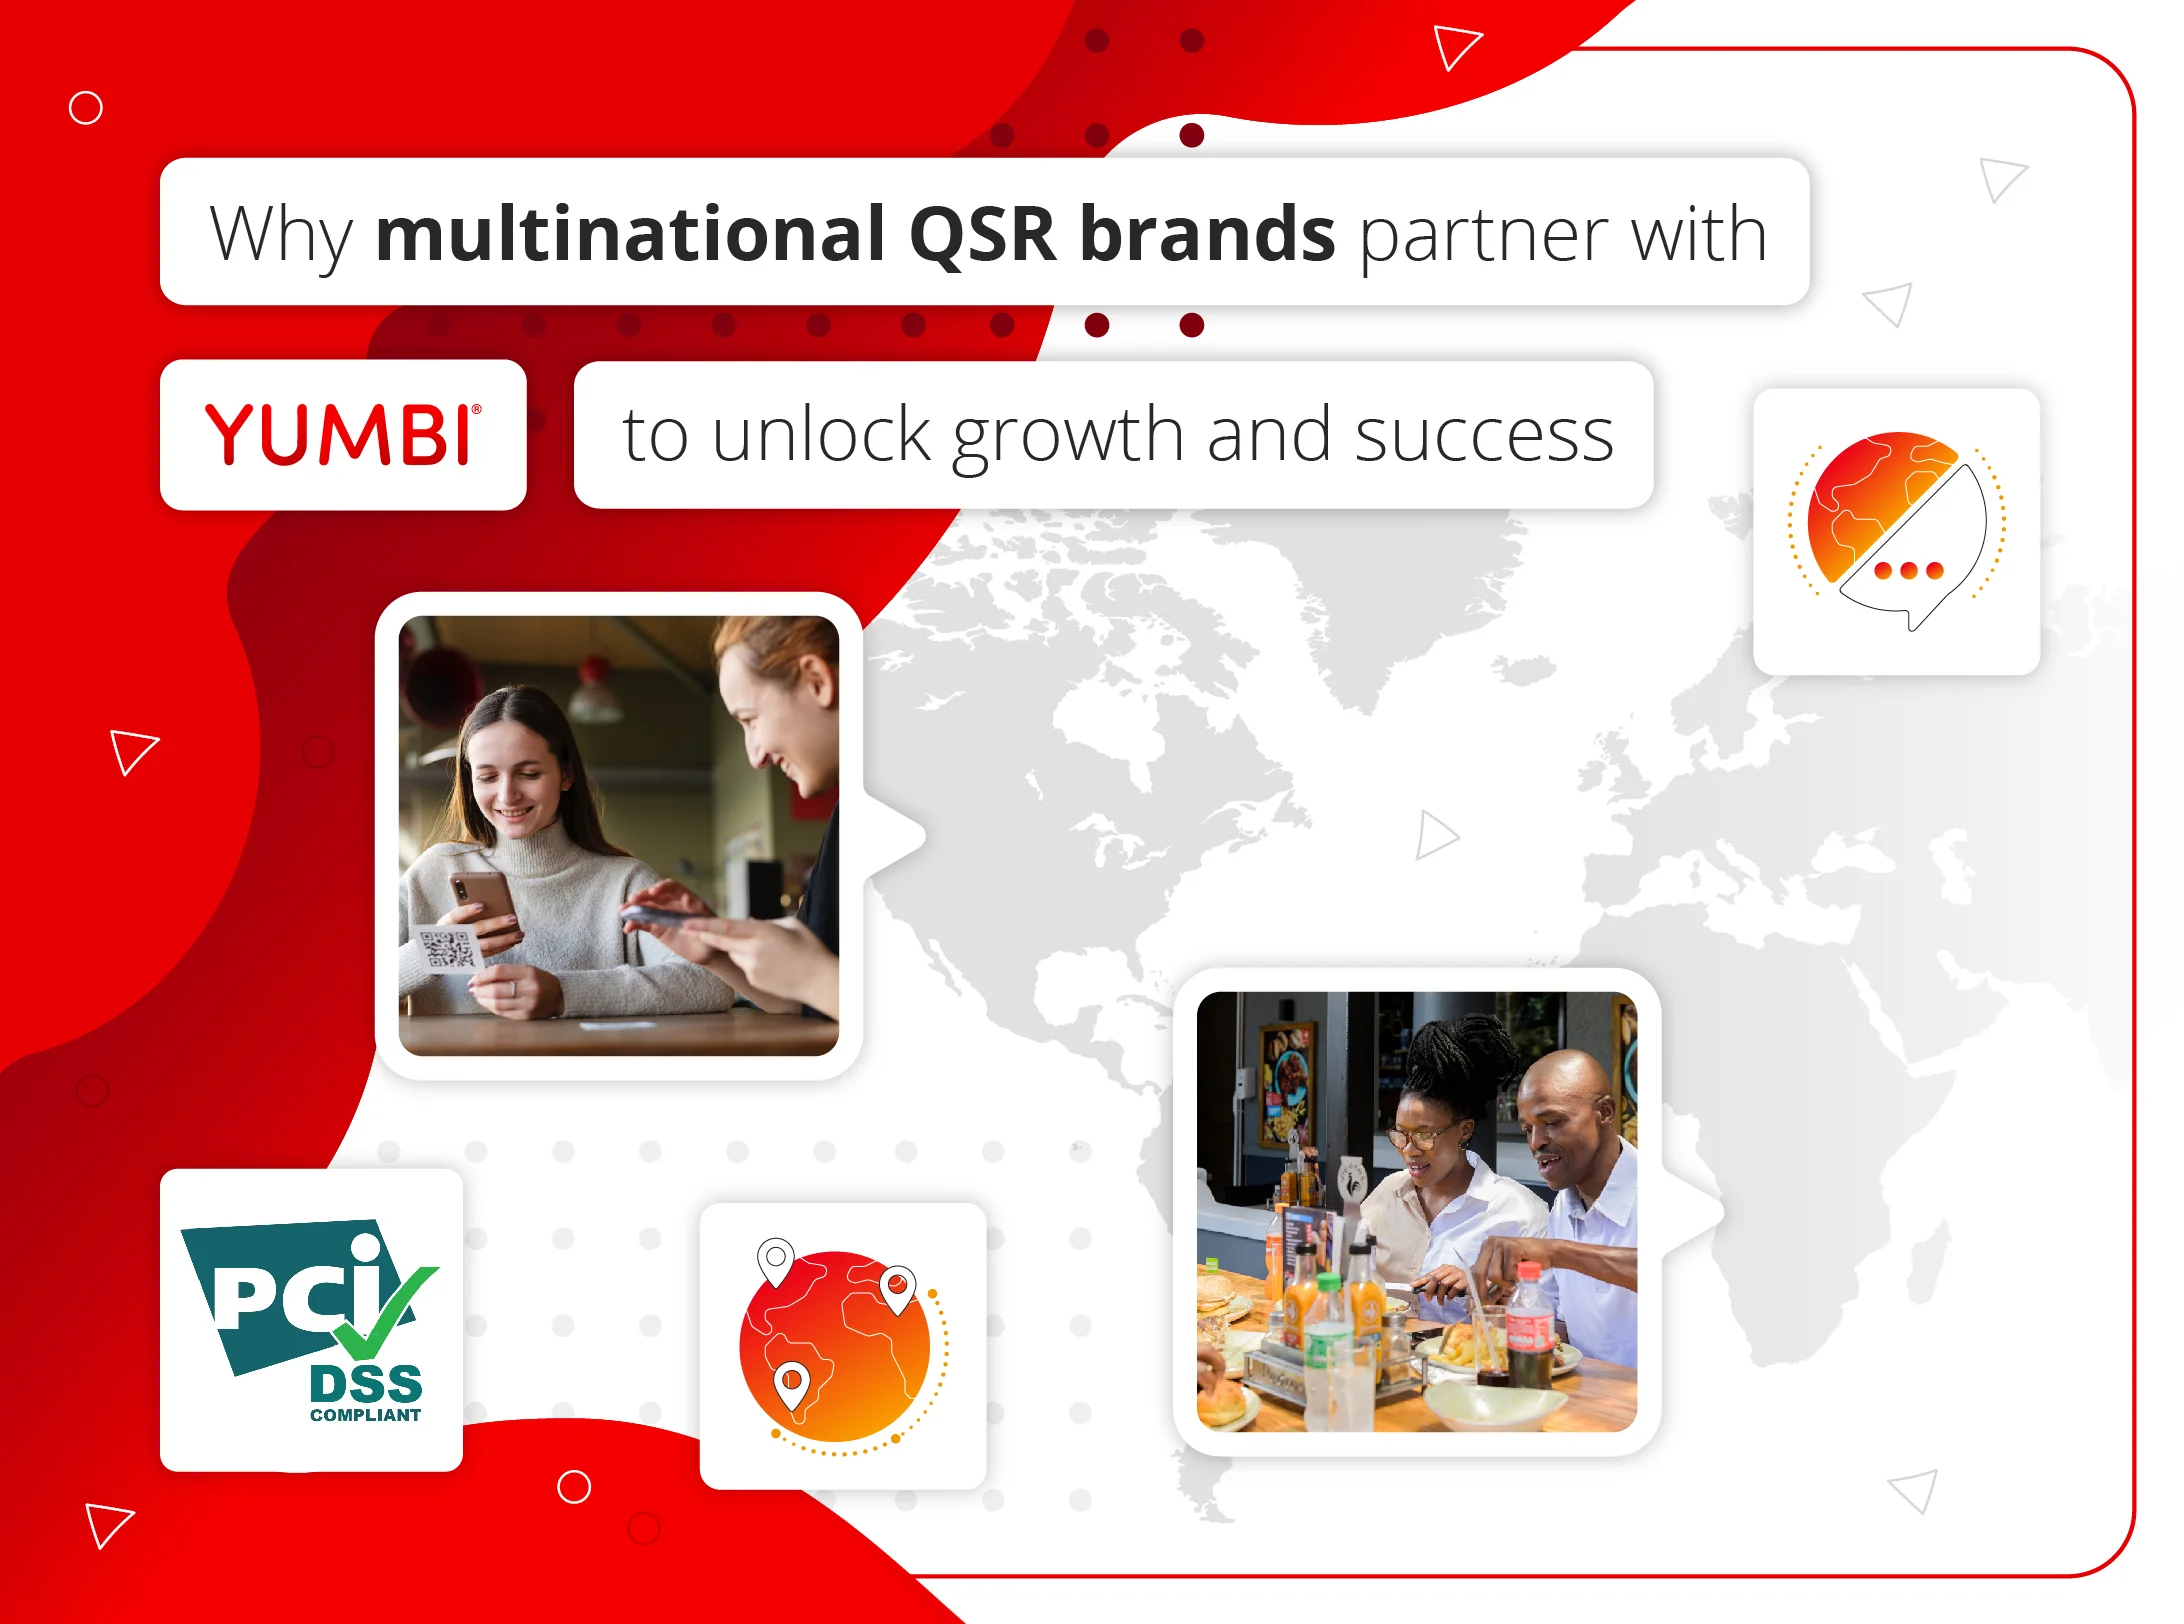 Why multinational QSR brands partner with YUMBI to unlock growth and success